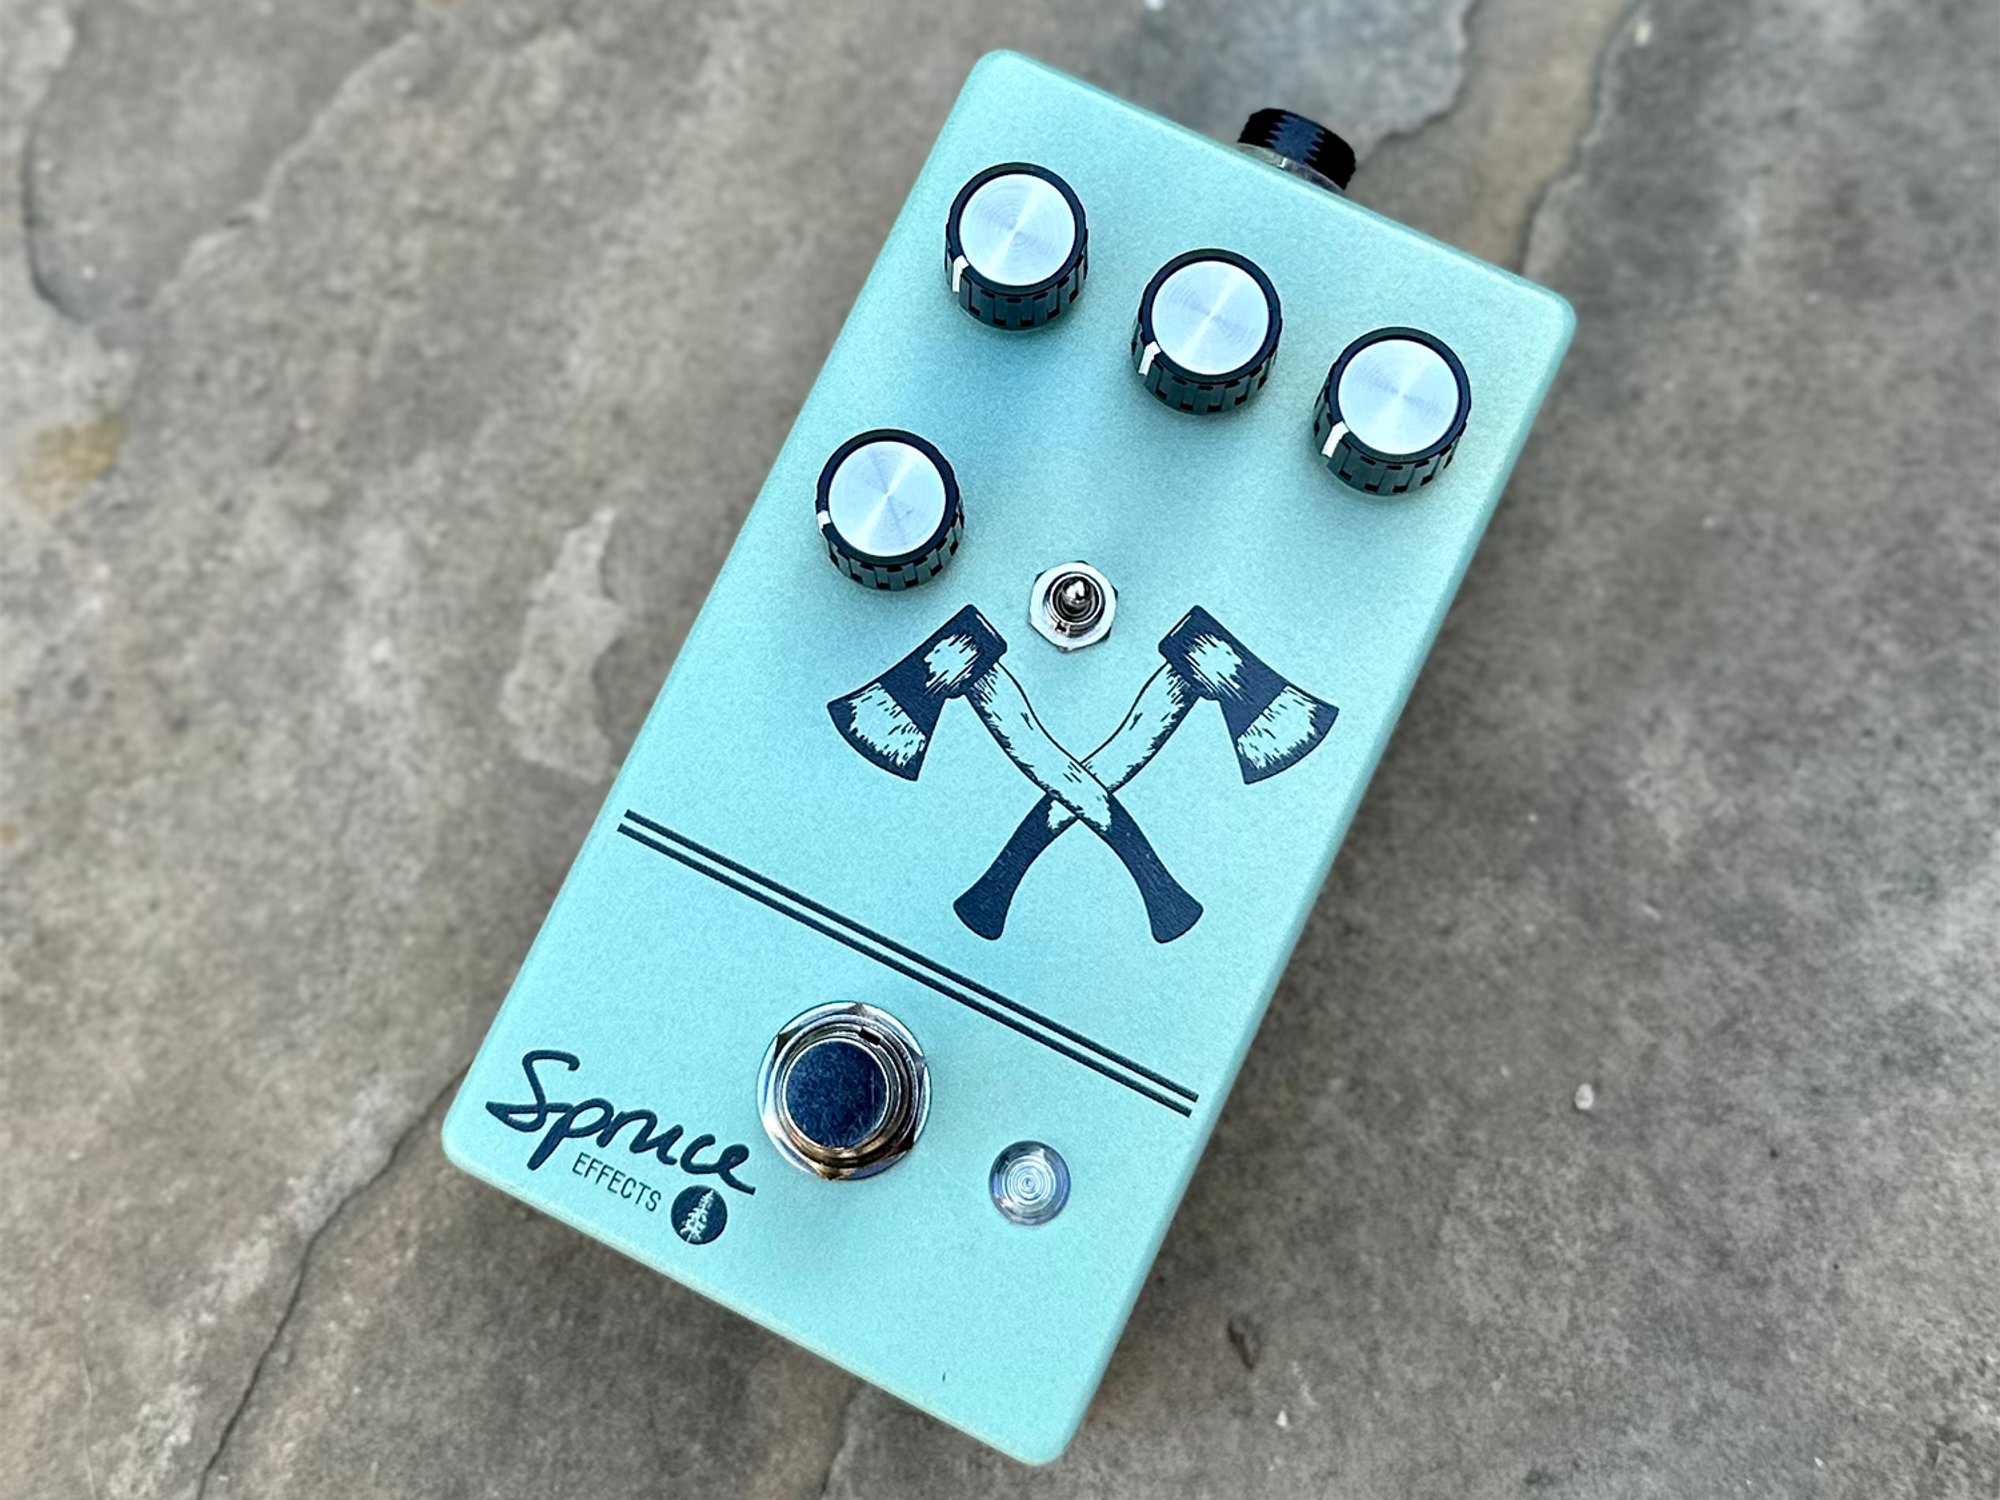 Spruce Effects Introduces Arborist V2 Overdrive